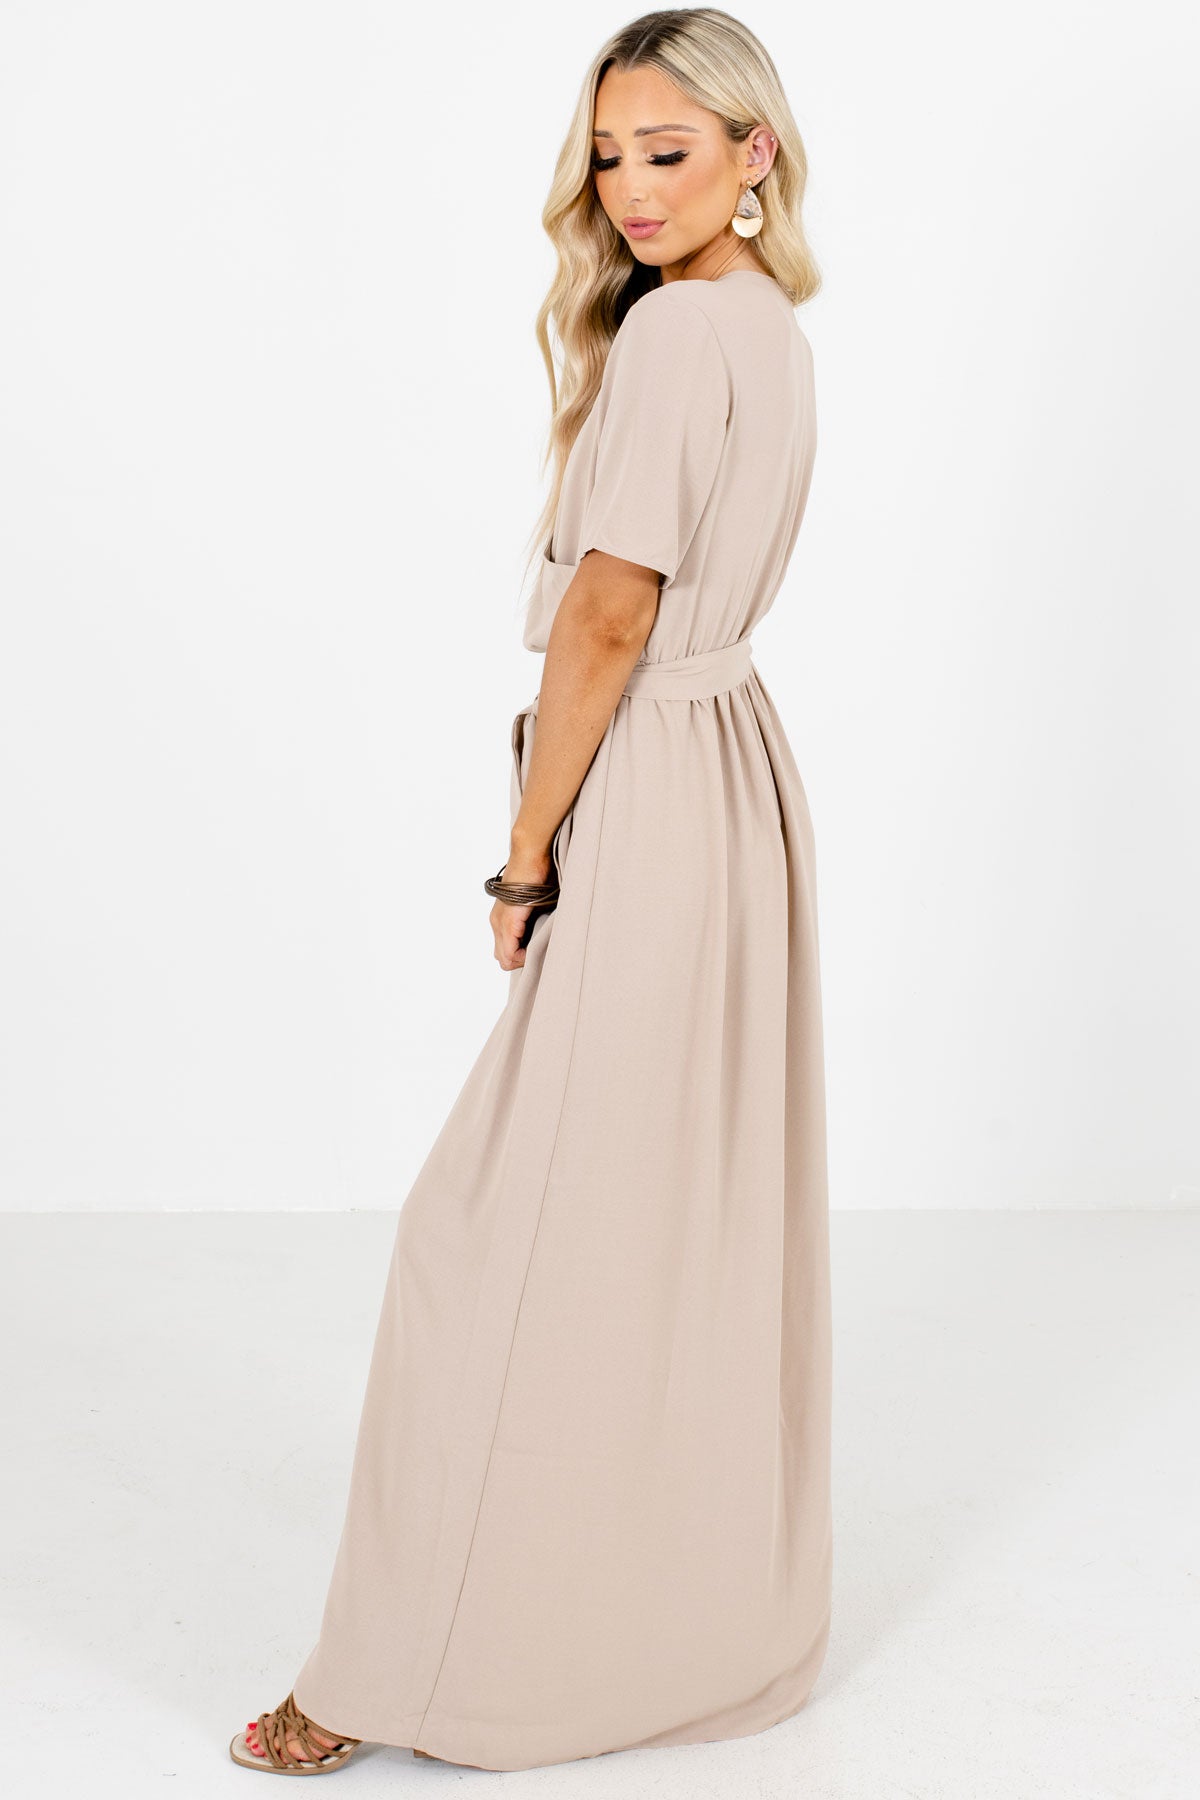 Tan Cute and Comfortable Boutique Maxi Dresses for Women